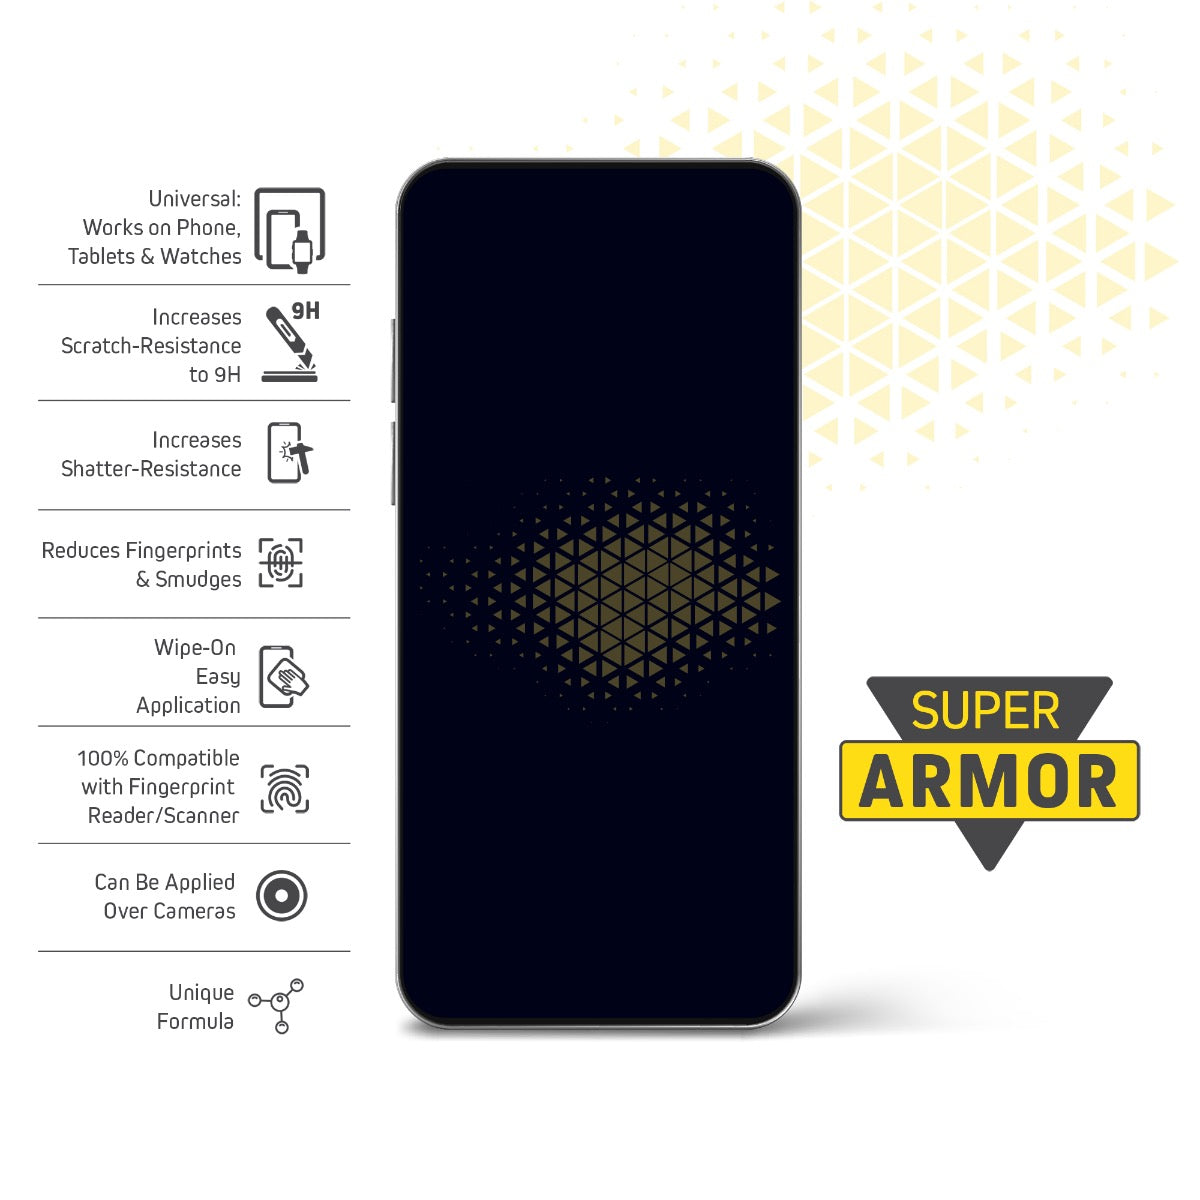 SUPER ARMOR Liquid Screen Protector for All Phones Tablets and Smart Watches